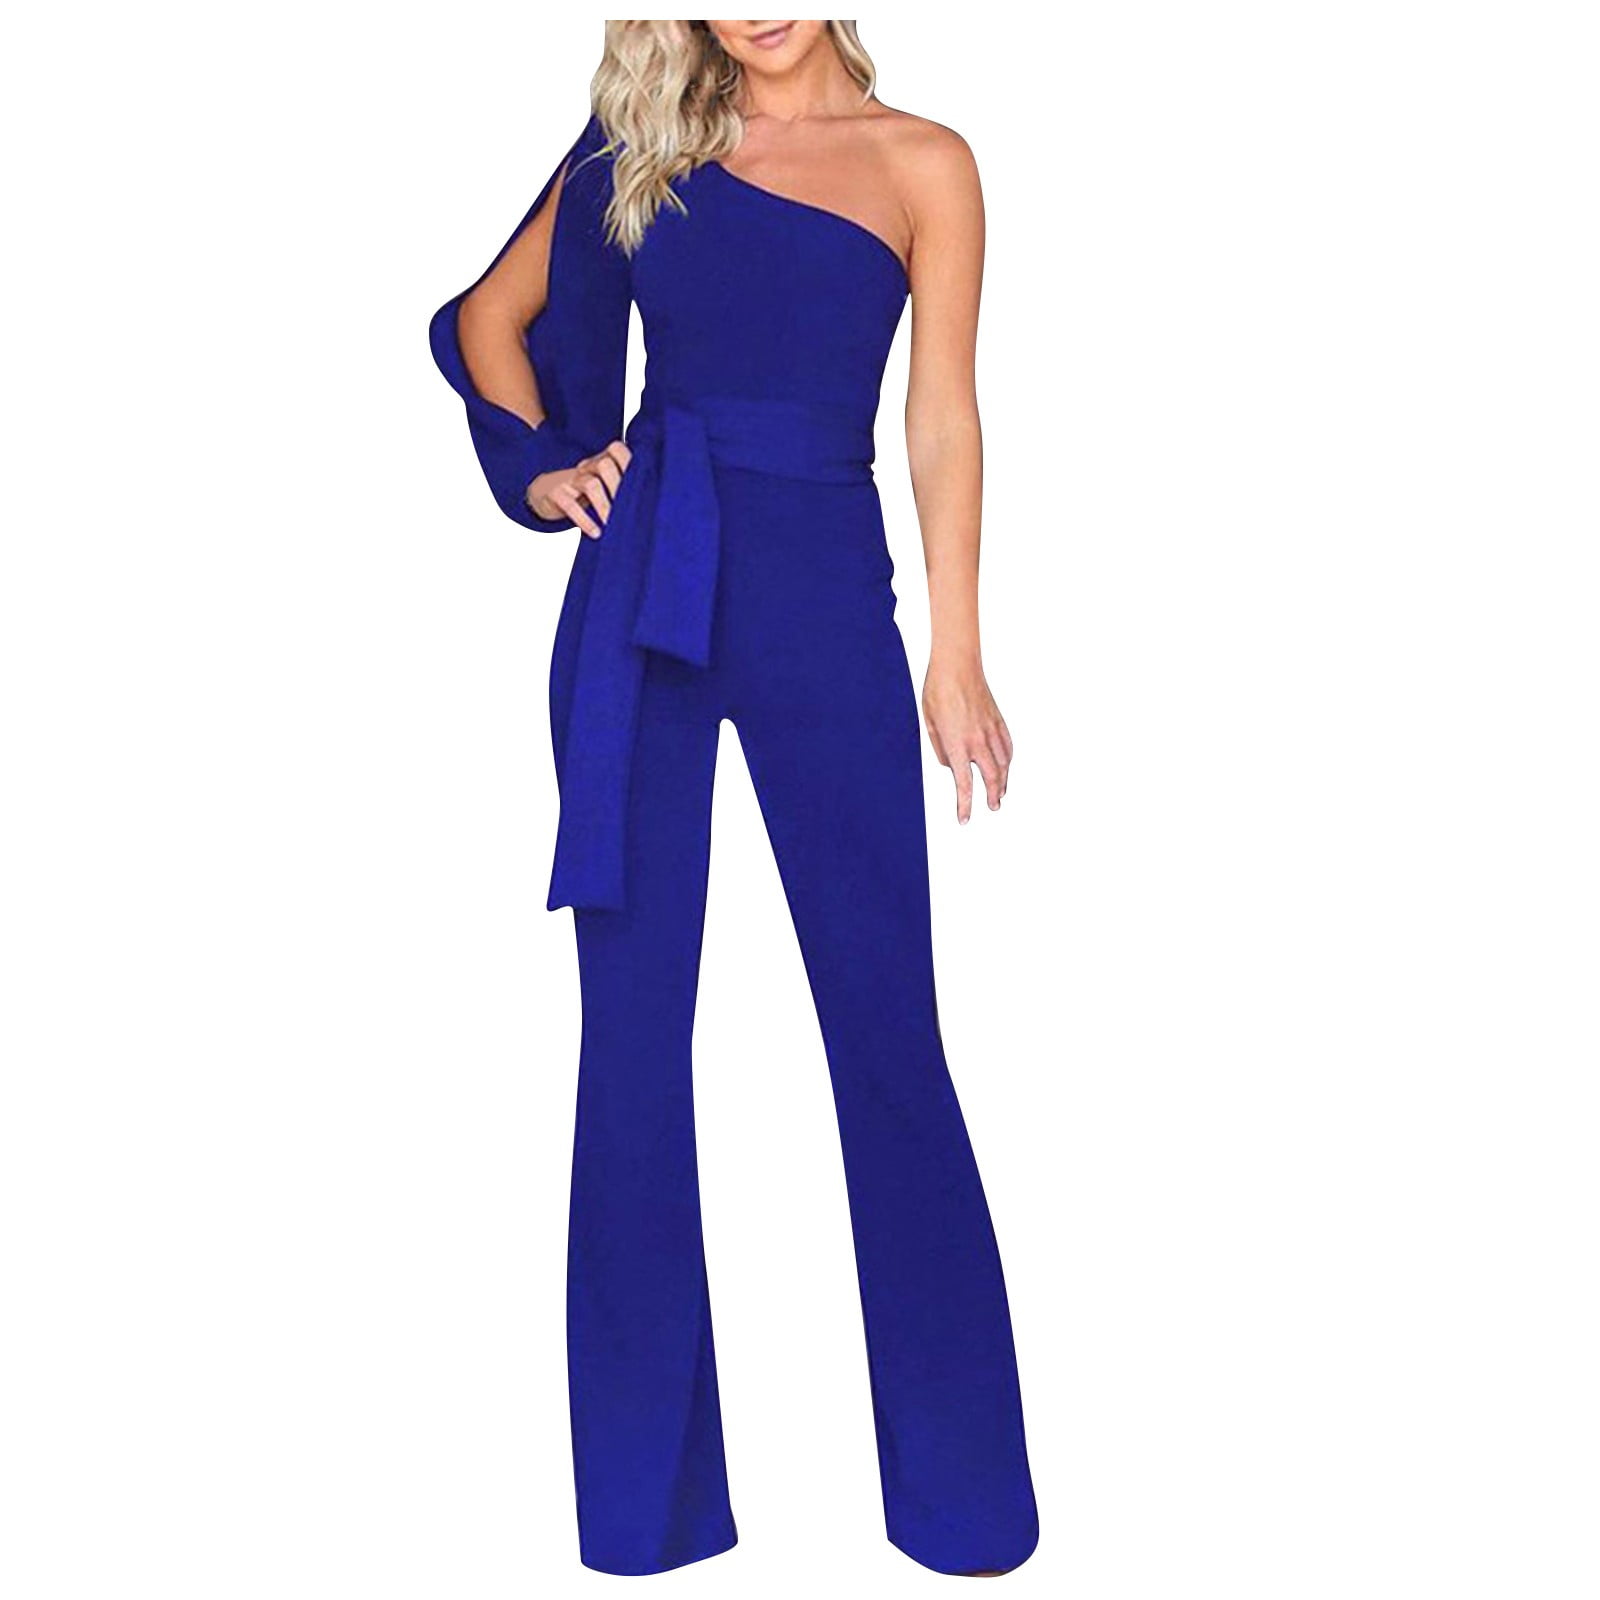 Overalls For Women Loose Fit, Wide Leg Jumpsuit With Pockets, Petite  Jumpsuits For Women Petite Length, Short Sleeve Rompers For Women, Womens  Jumpers